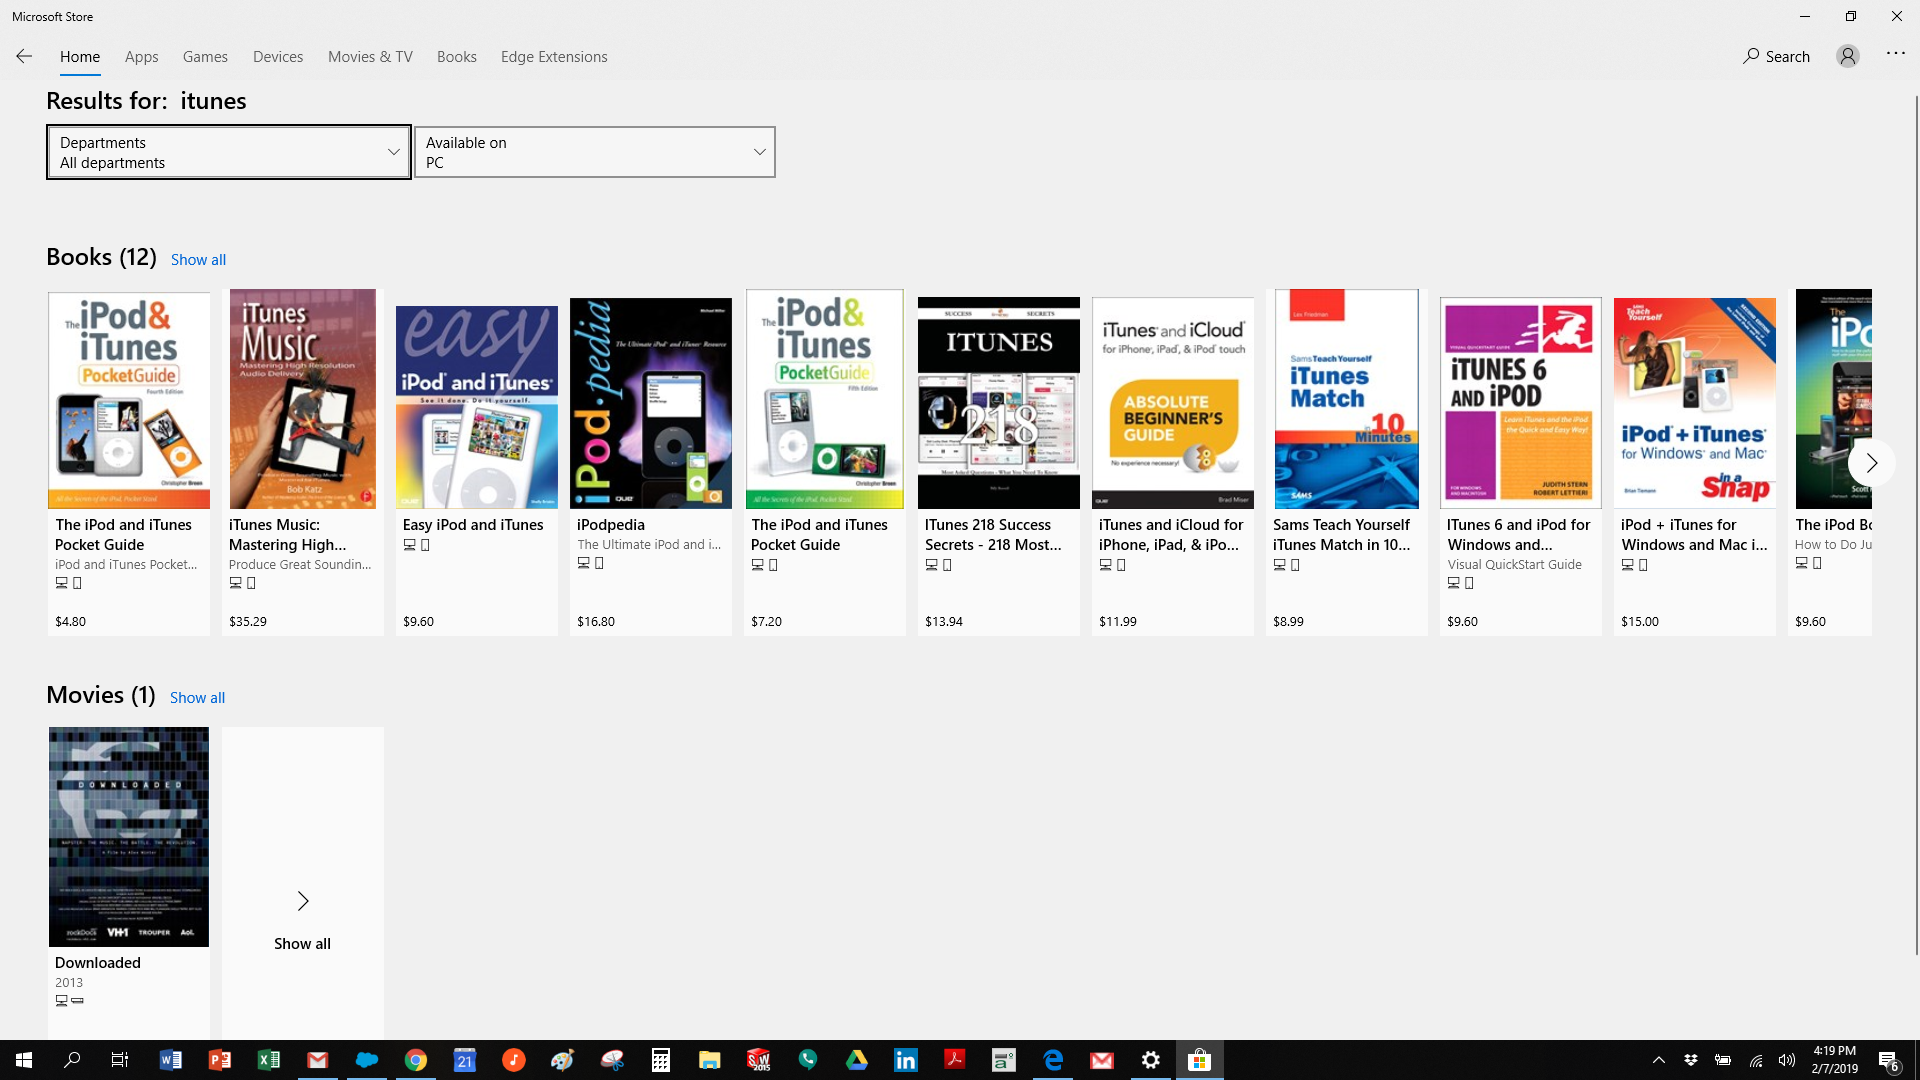 Microsoft Store Search displaying incorrect results 86250645-1bdc-4db0-a74a-03950fd141d1?upload=true.png